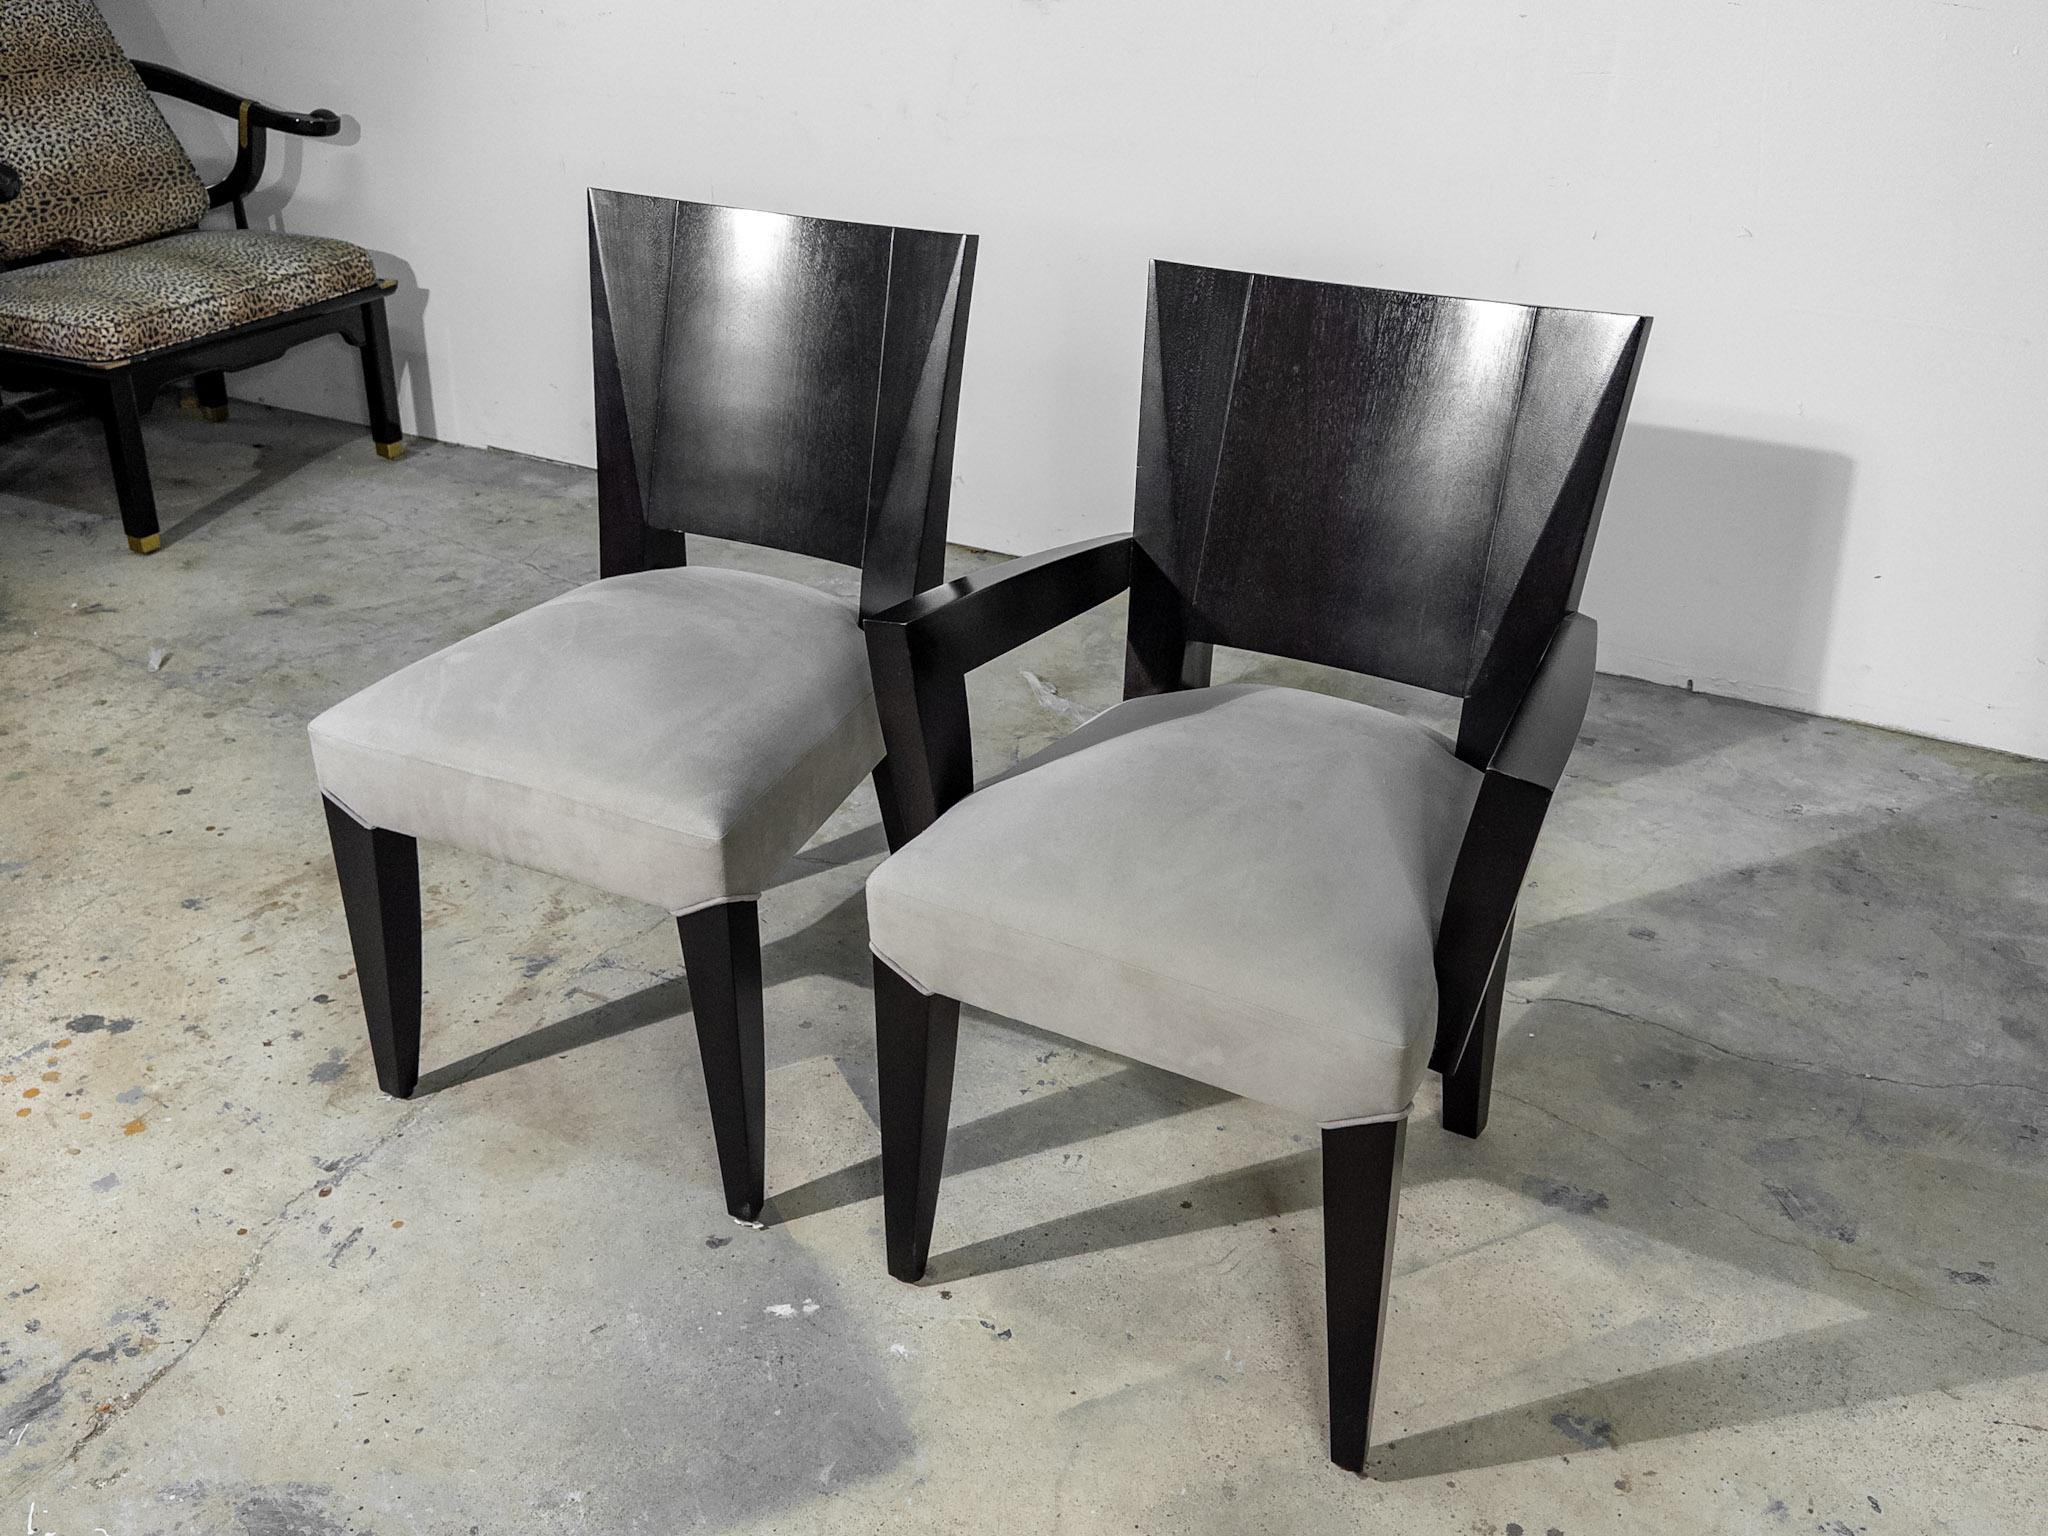 20th Century Set of 10 Ocean Dining Chairs by Dakota Jackson (2 Arm Chairs, 8 Side Chairs) For Sale